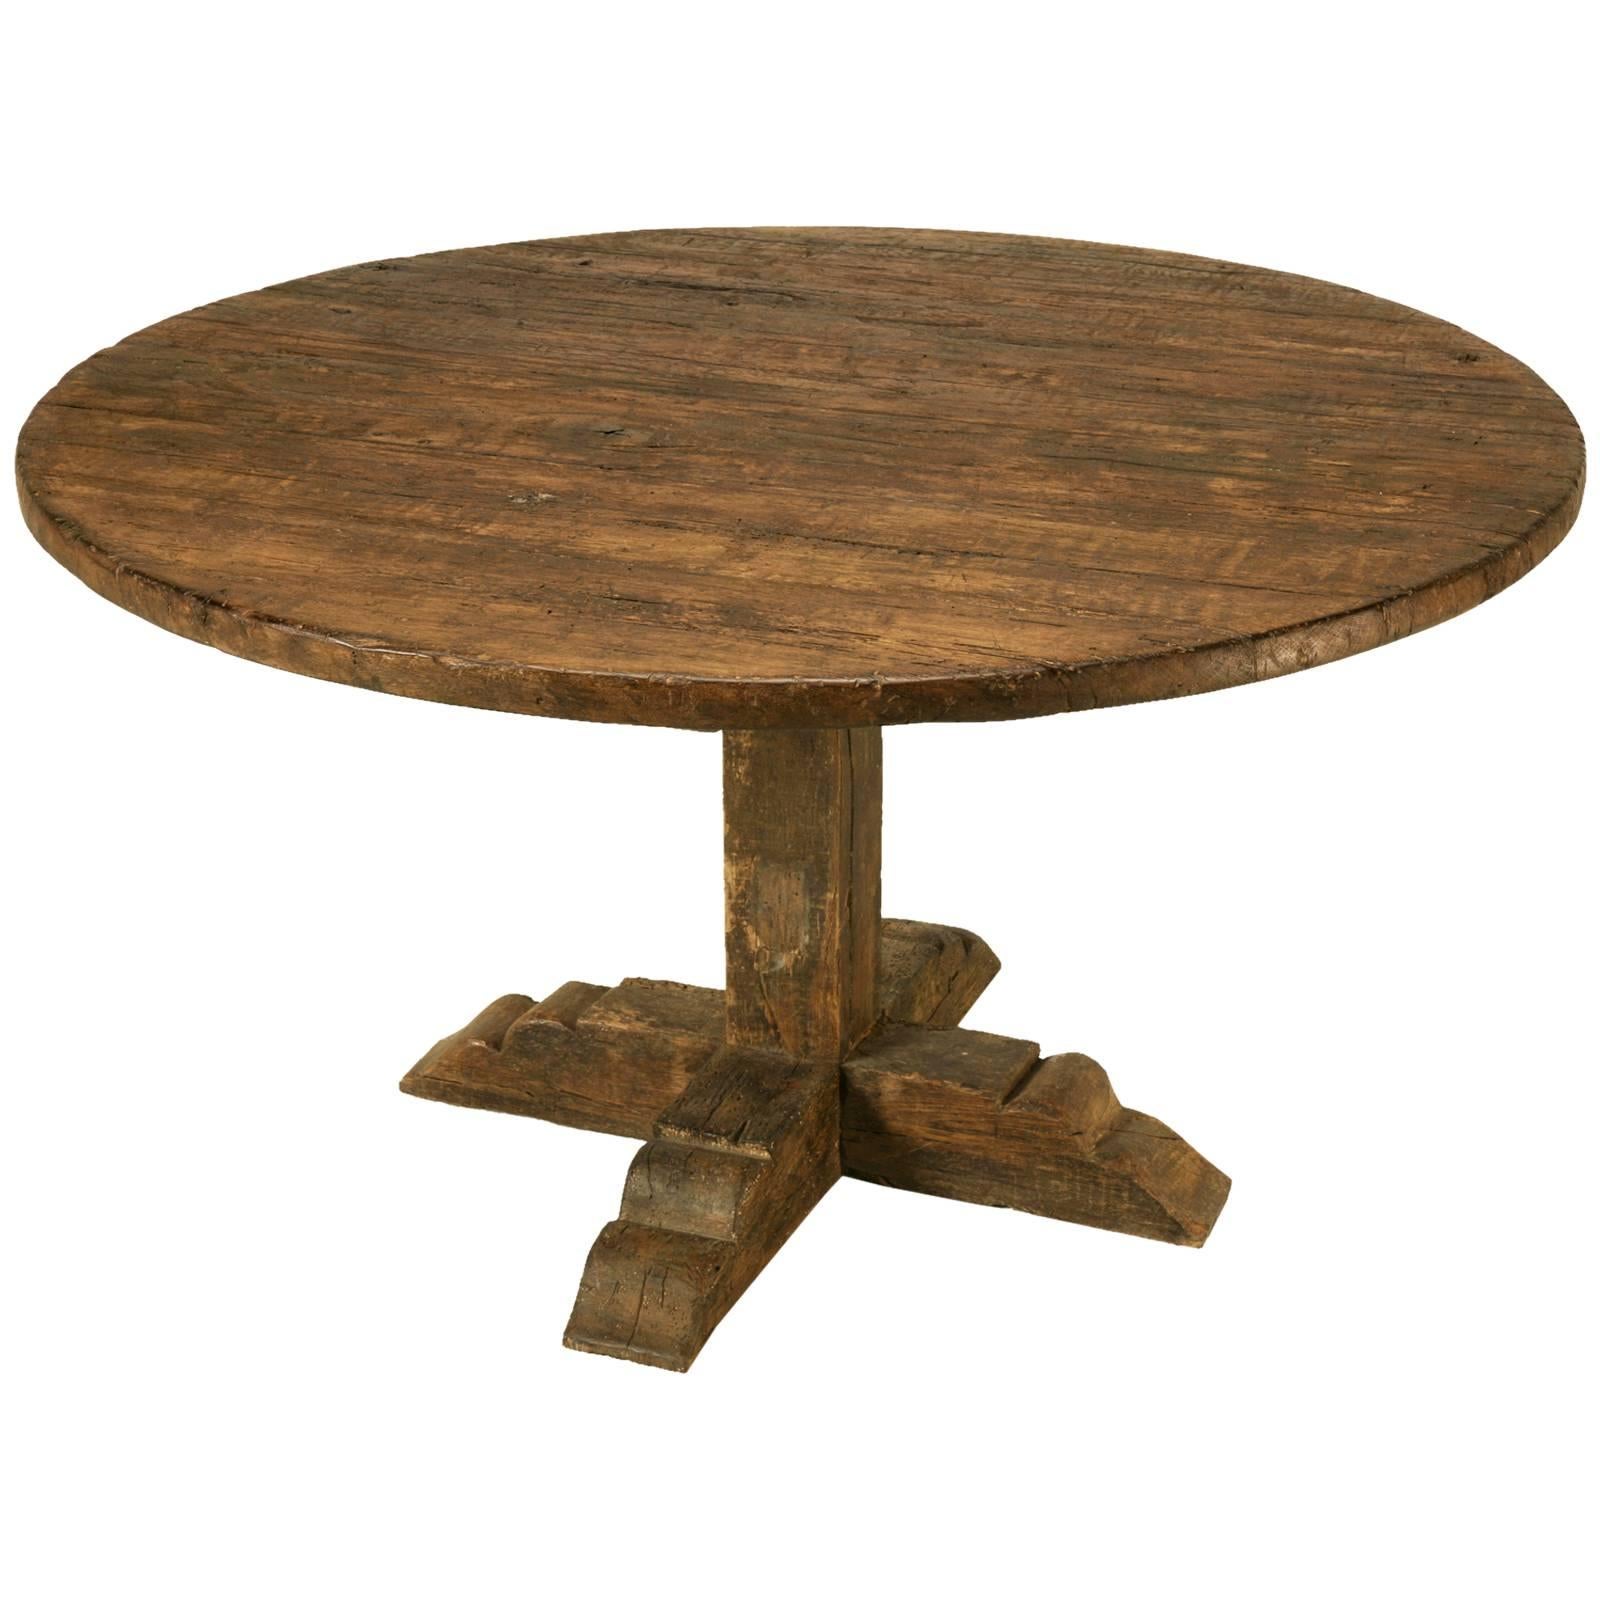 Italian Round Dining Table, Handcrafted by Old Plank in Any Dimension or Finish